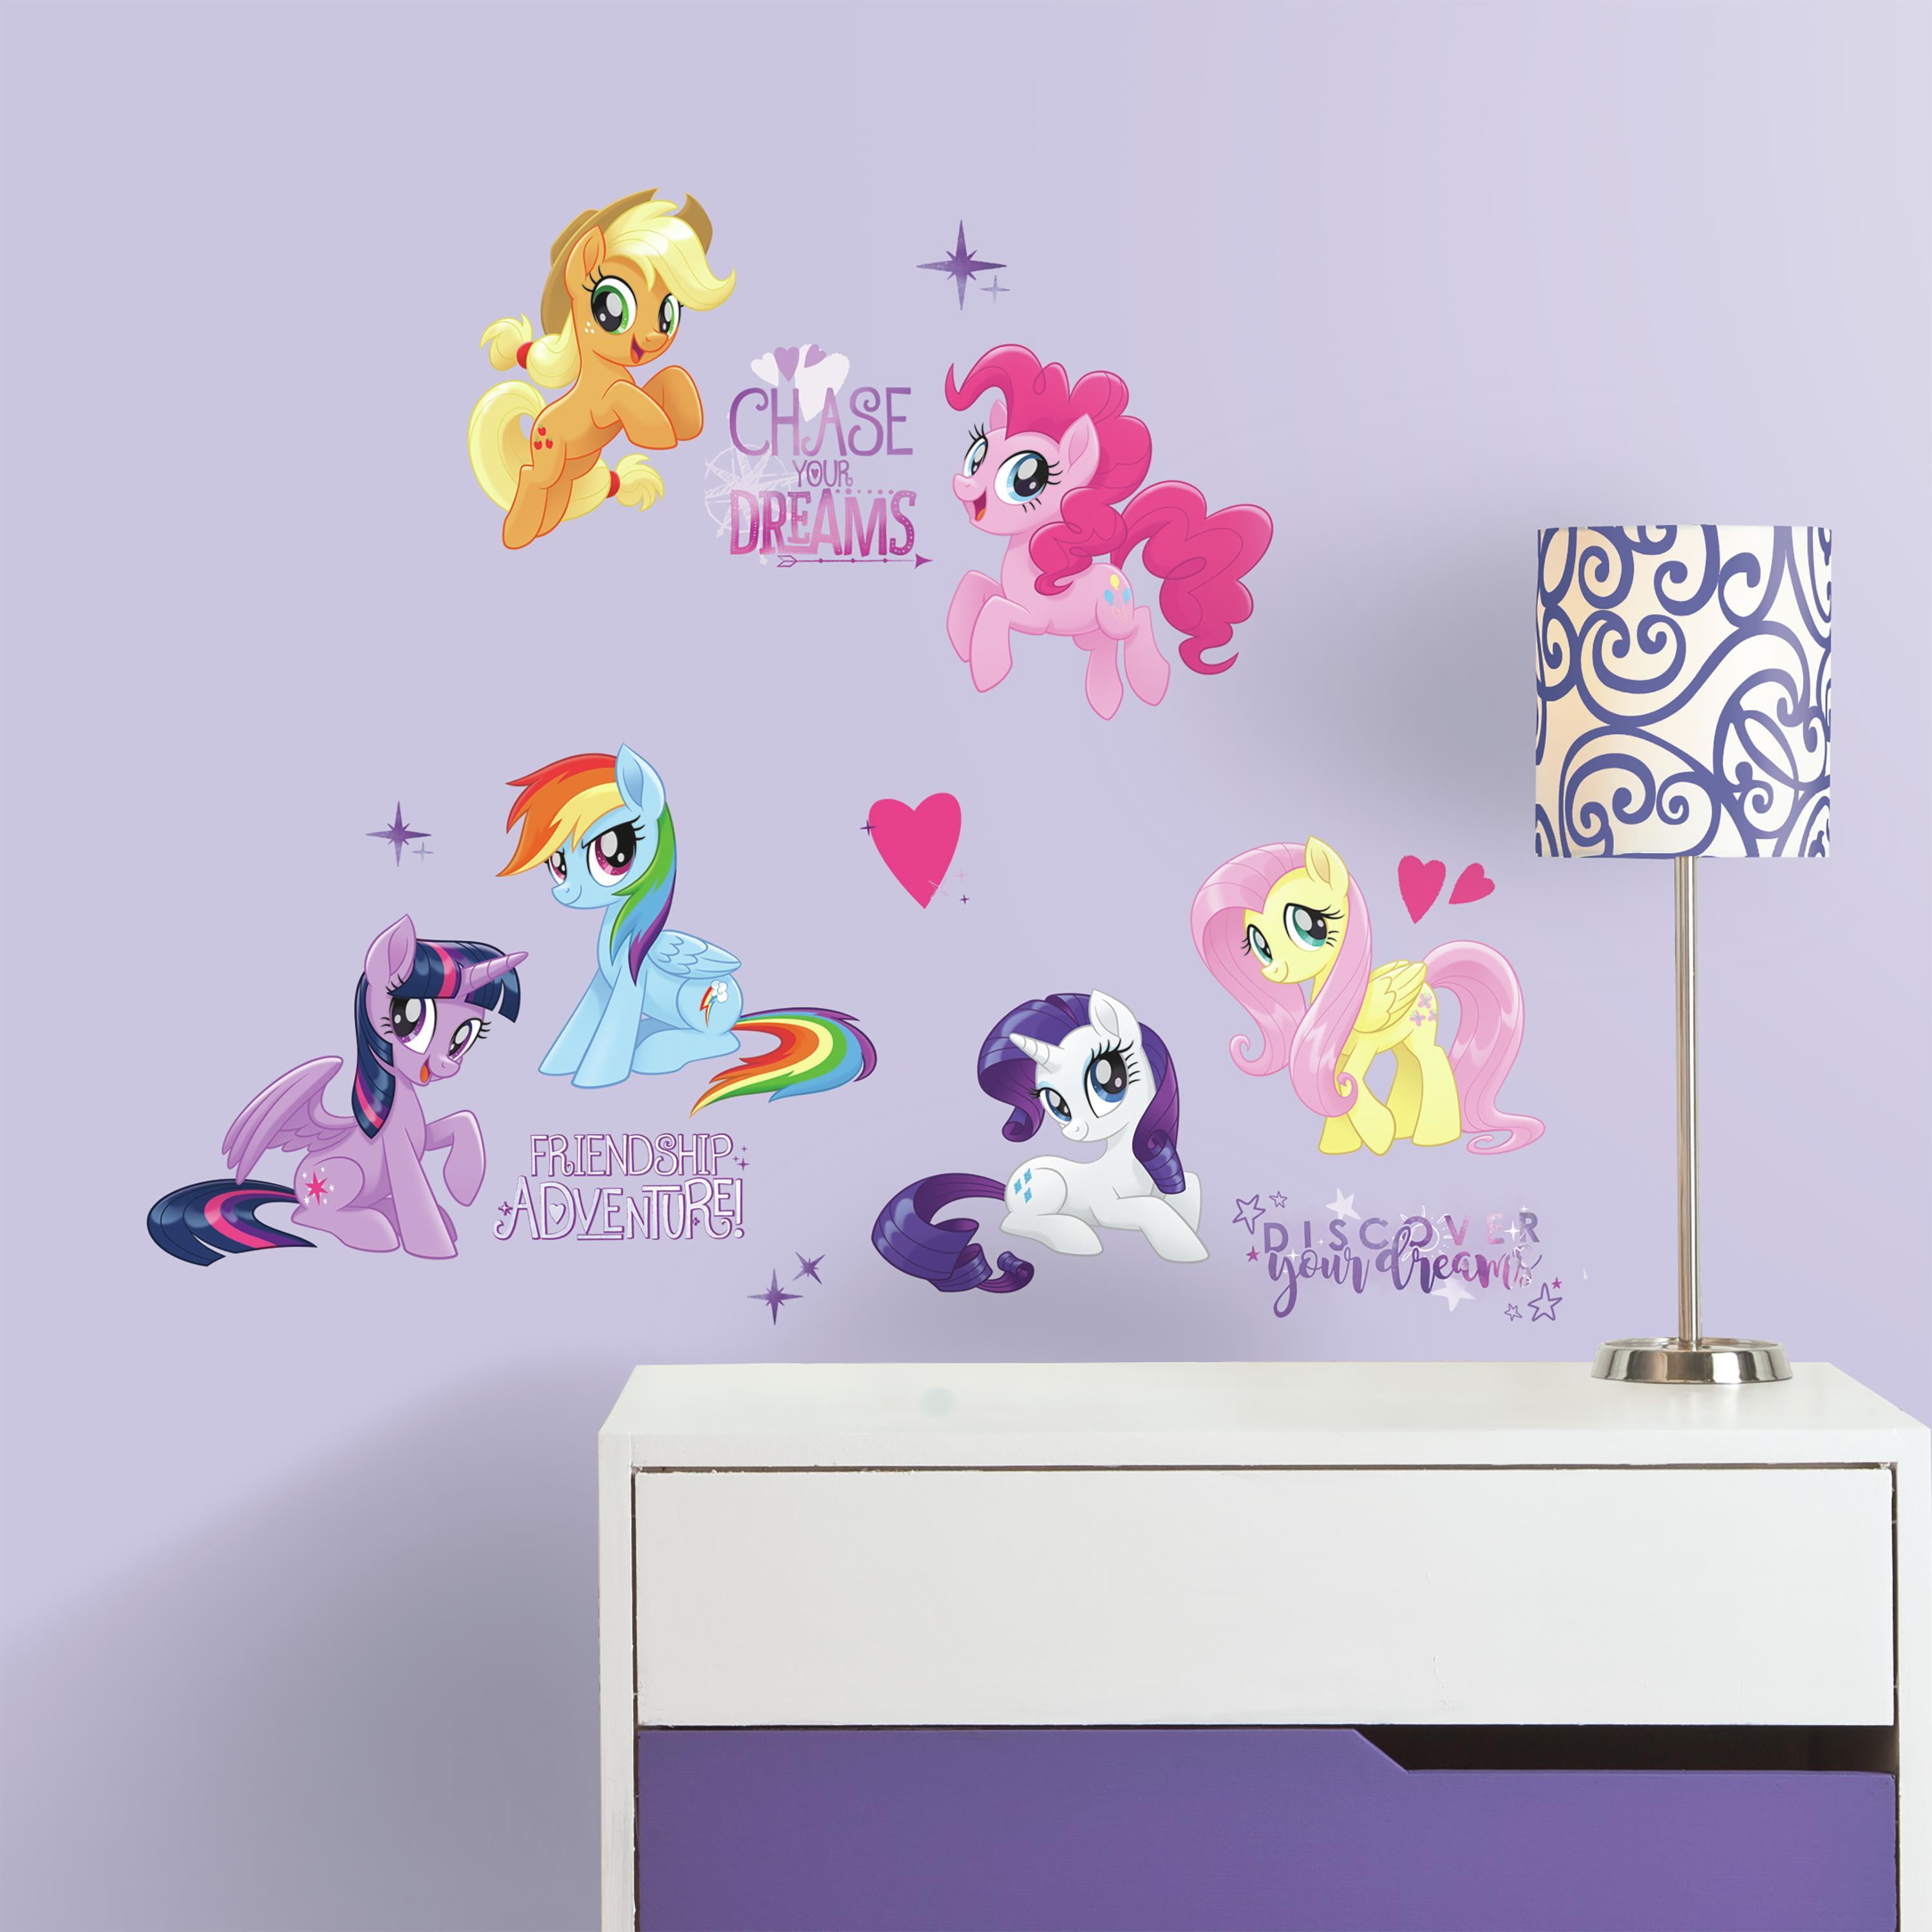 RoomMates Lol Surprise! Repositionable Peel and Stick Wall Decals 